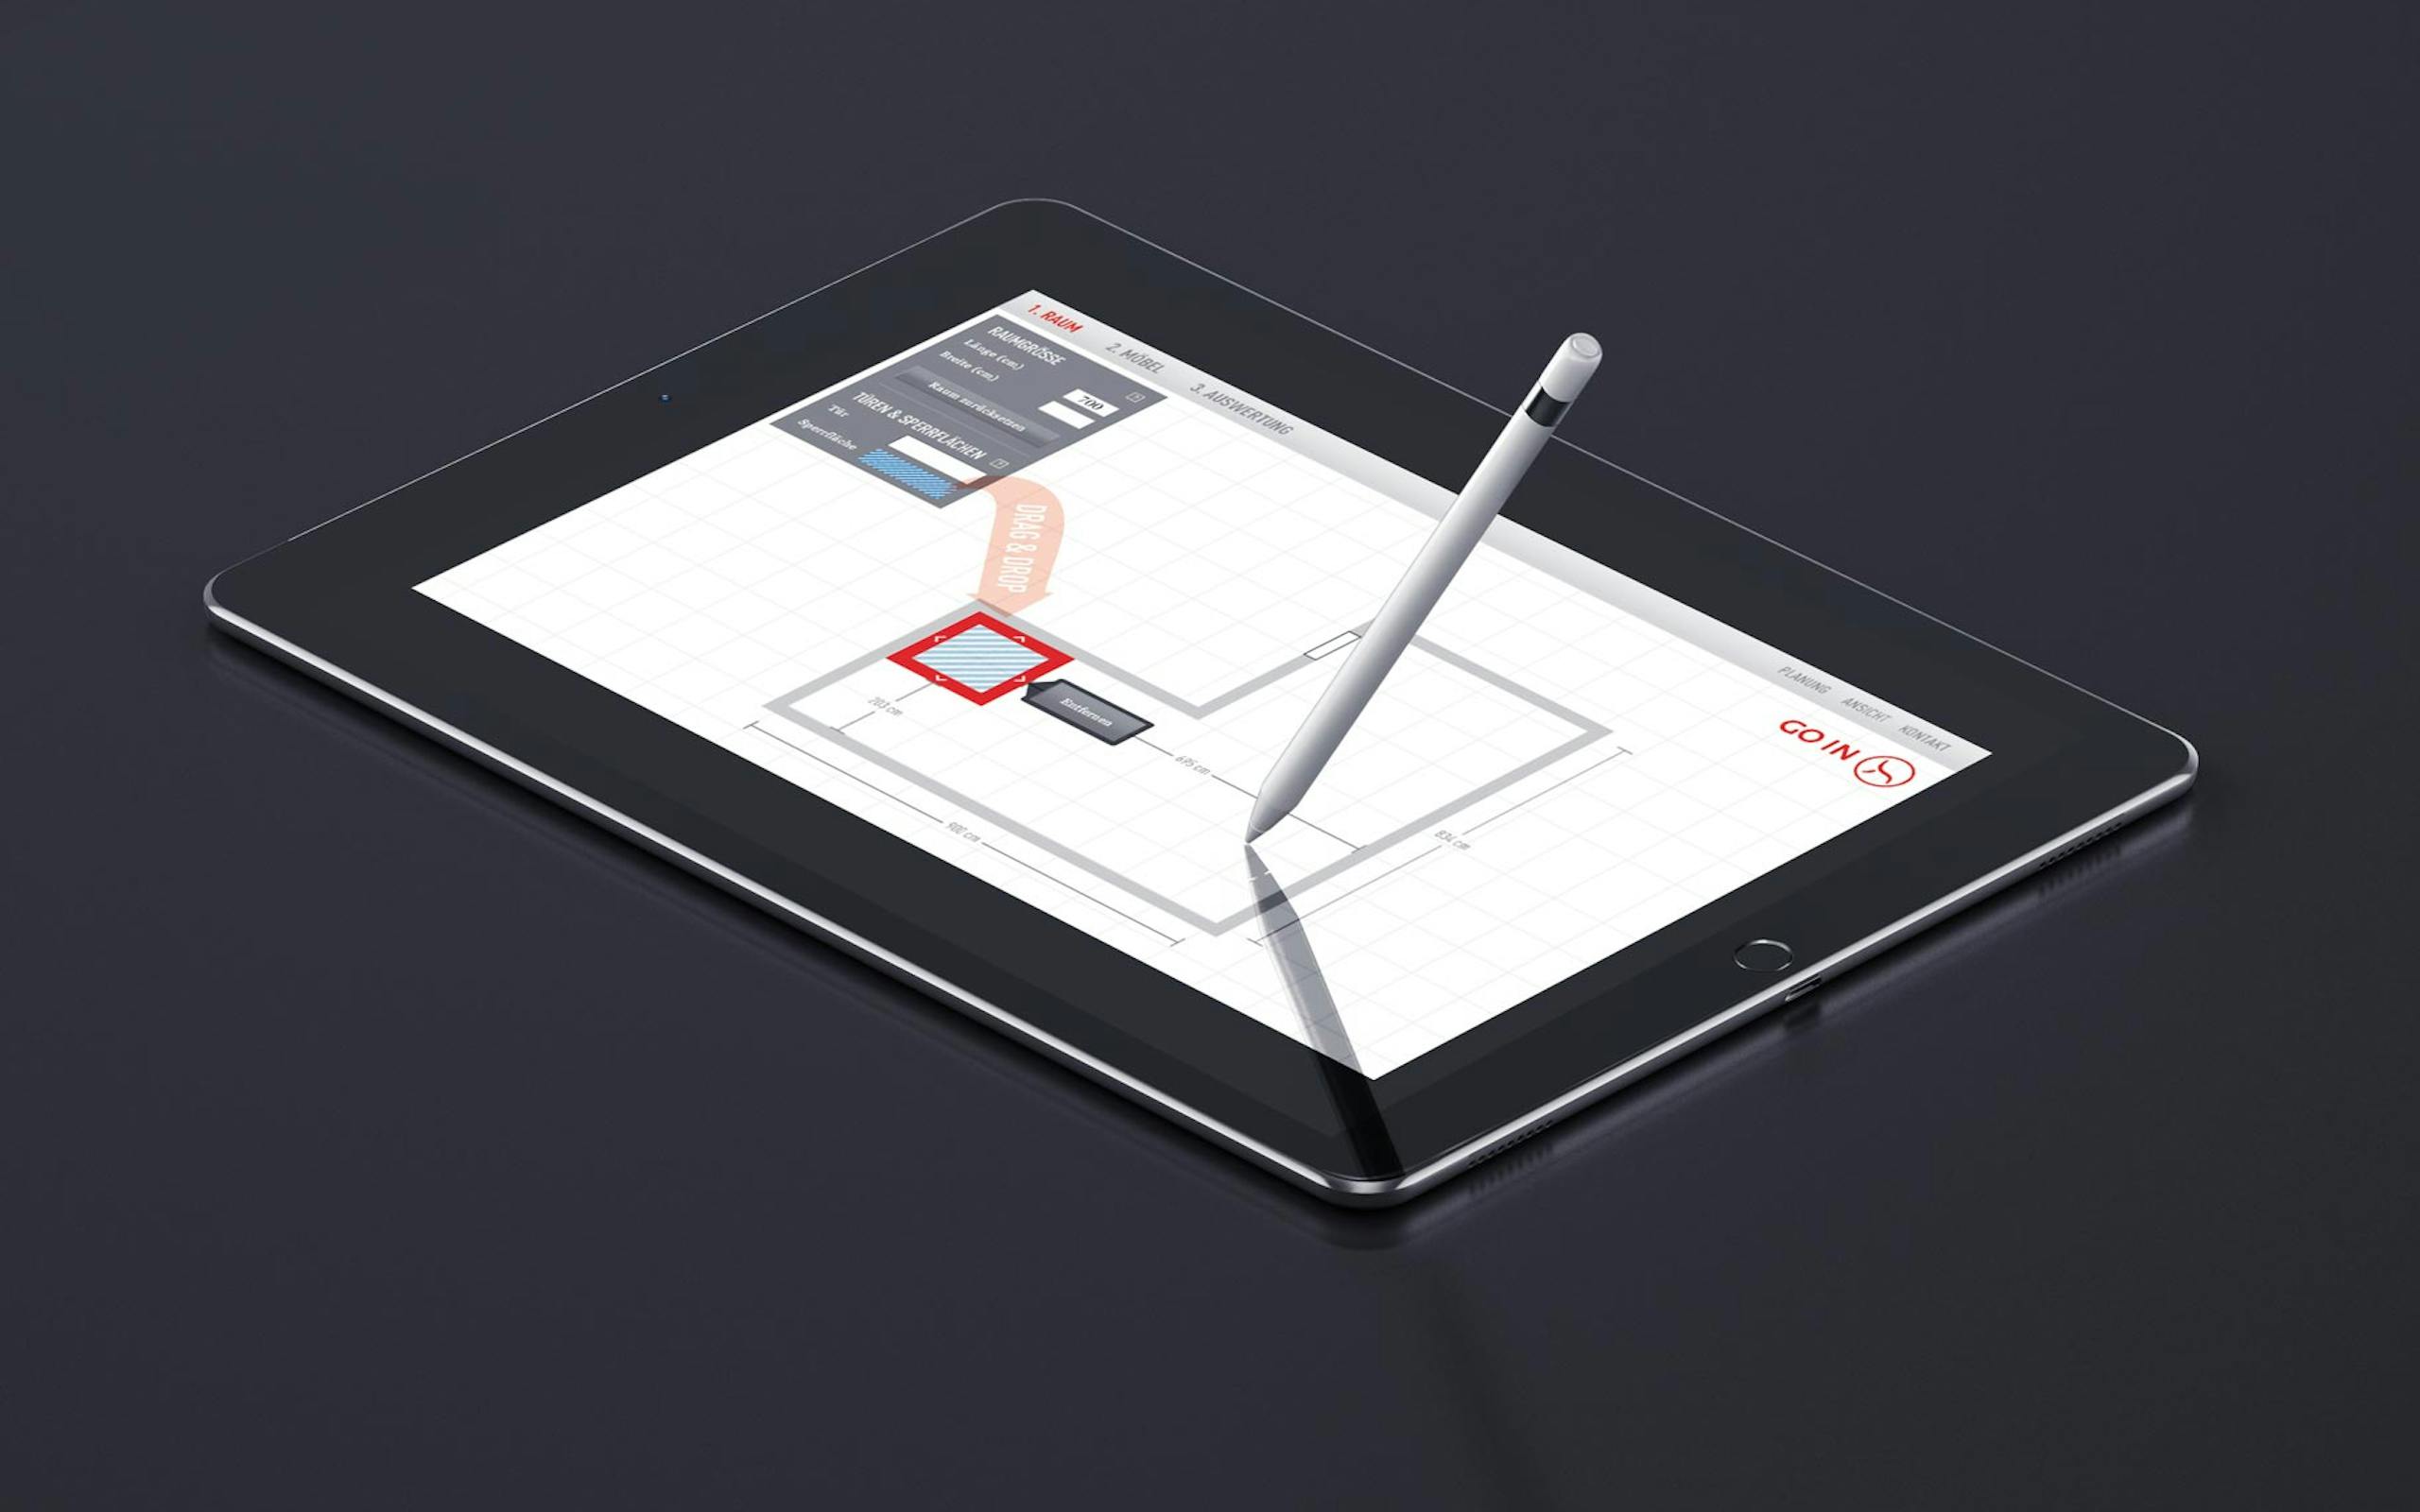 A horizontal tablet shows a product configurator from Go in.